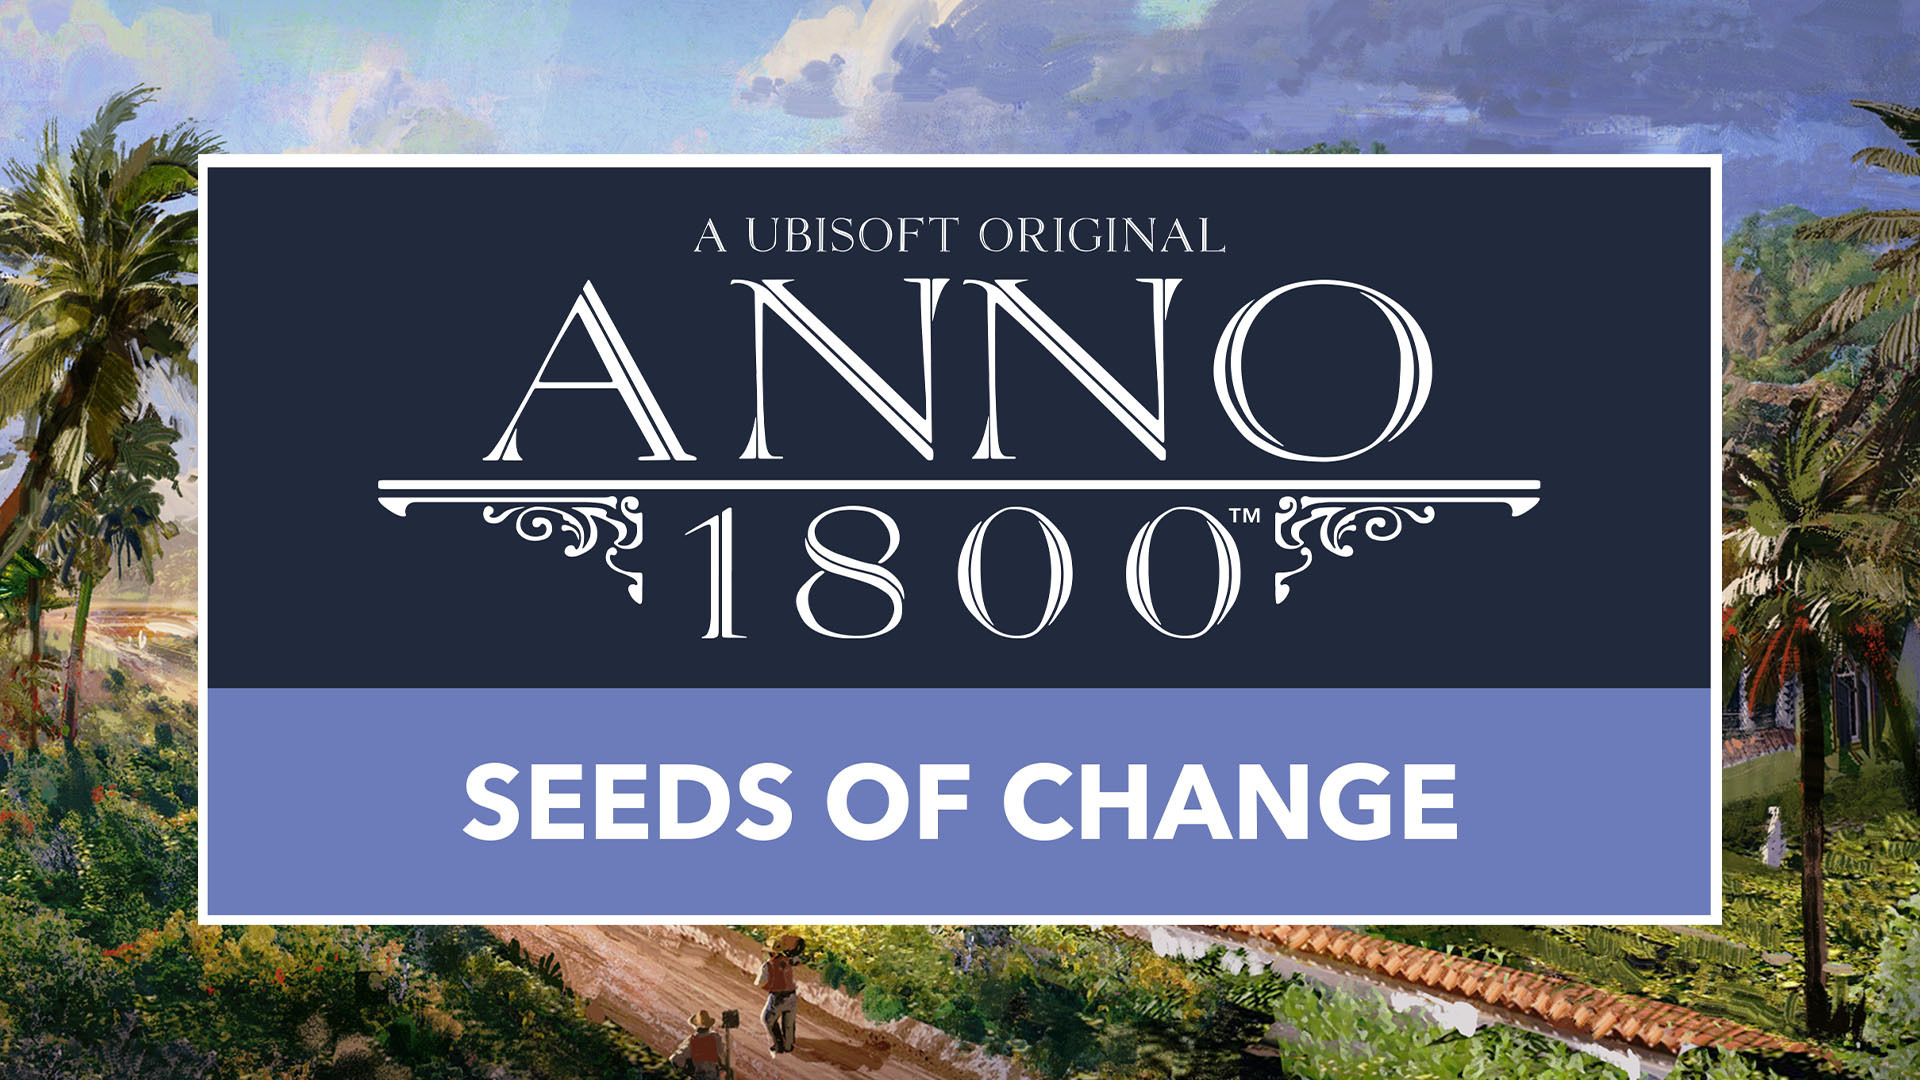 Anno 1800 Console Edition Box Shot for PlayStation 5 - GameFAQs